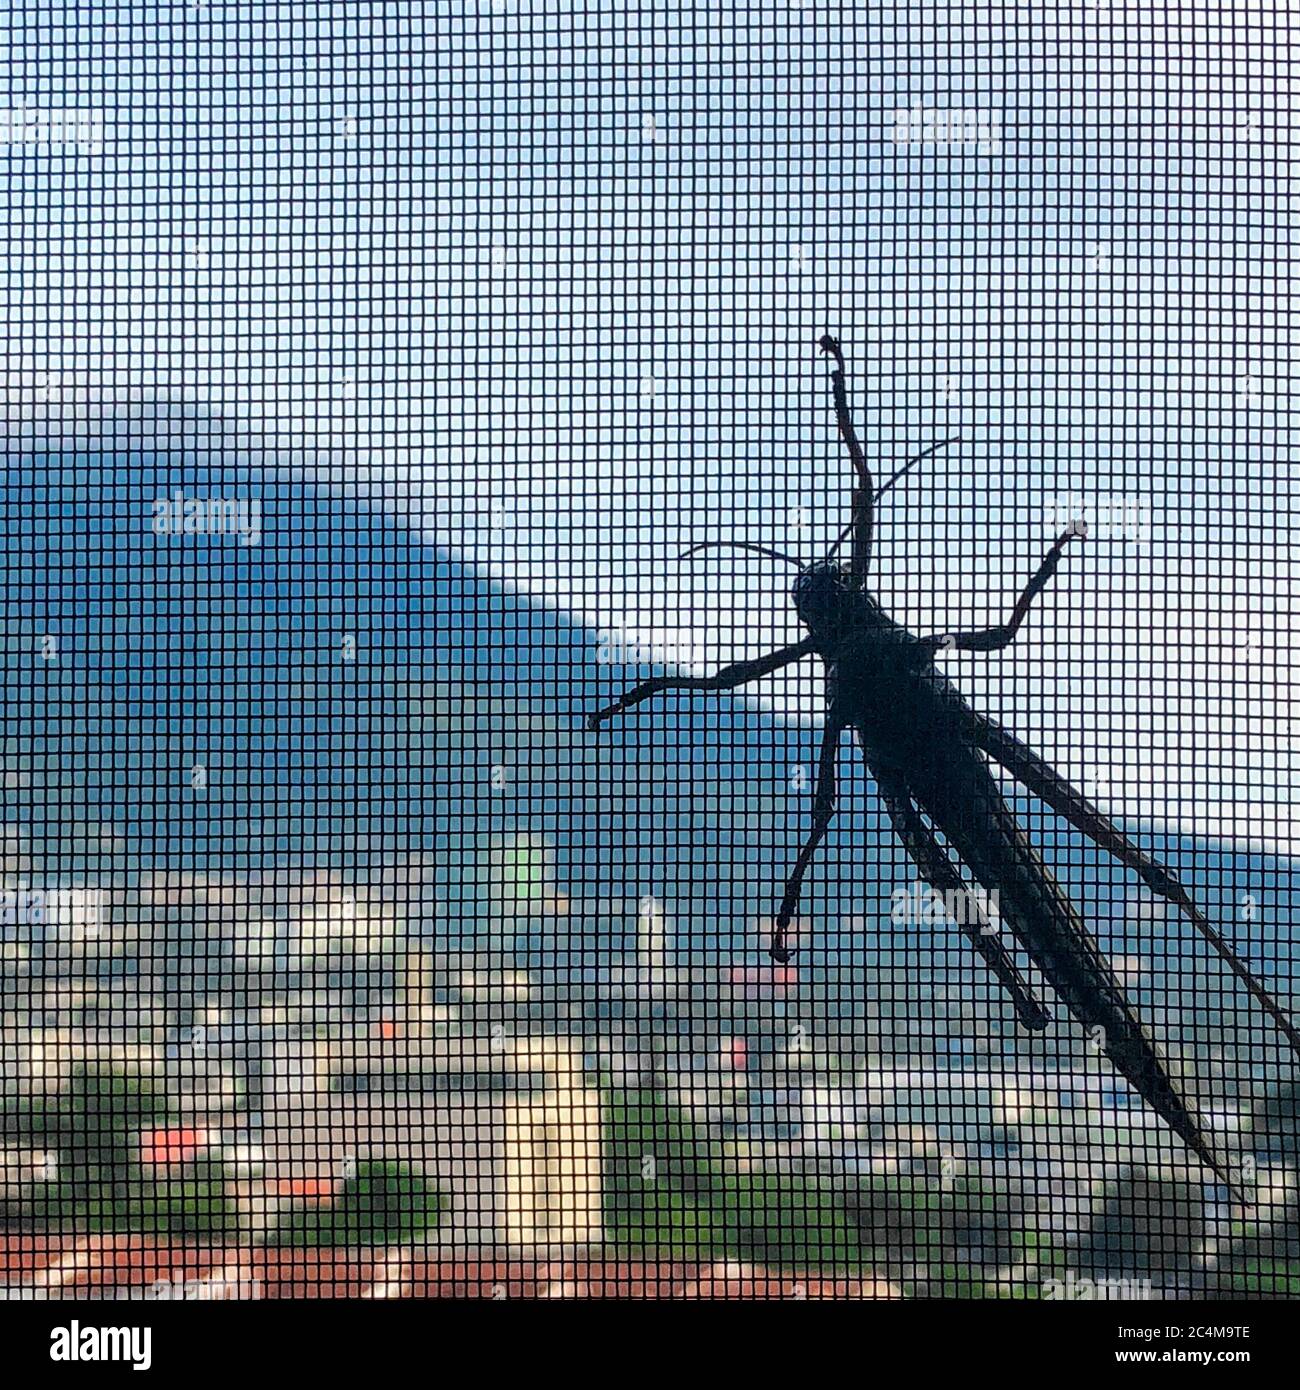 Selective focus shot of a grasshopper on a screendoor with a town and mountains in the background Stock Photo